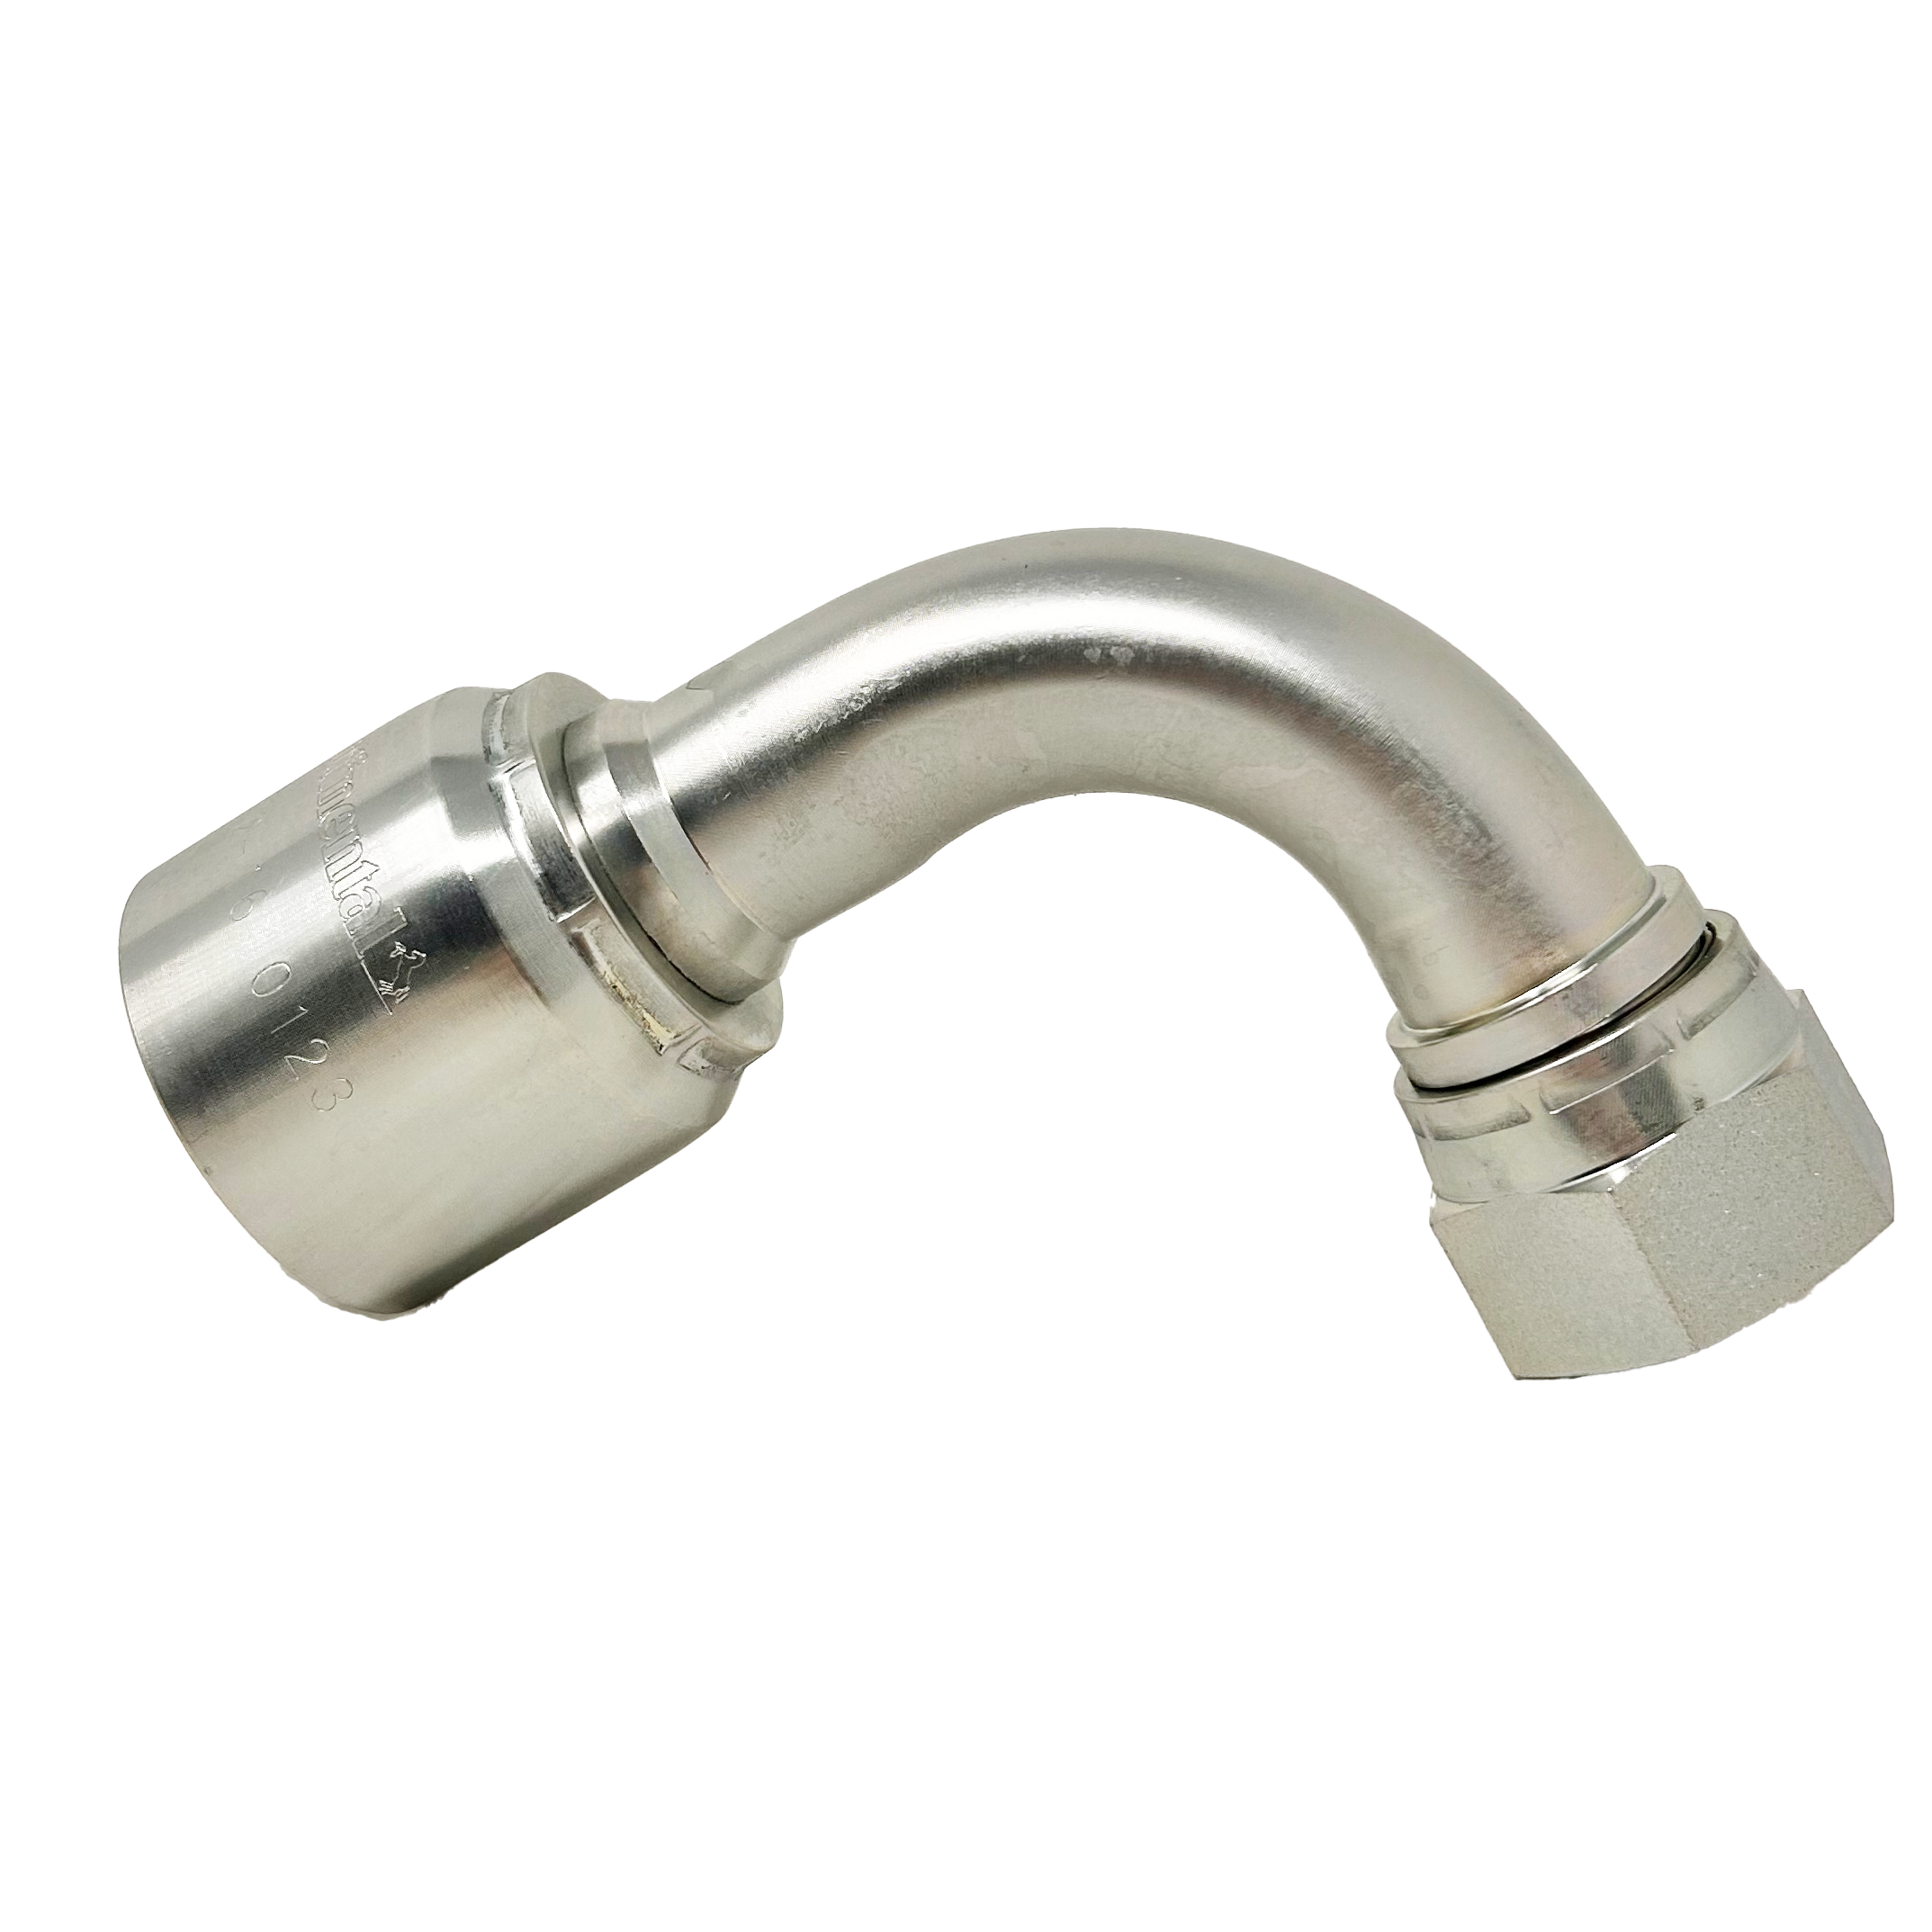 B2-JCFX90-2020S: Continental Hose Fitting, 1.25 (1-1/4") Hose ID x 1-5/8-12 Female JIC, 90-Degree Swivel Connection